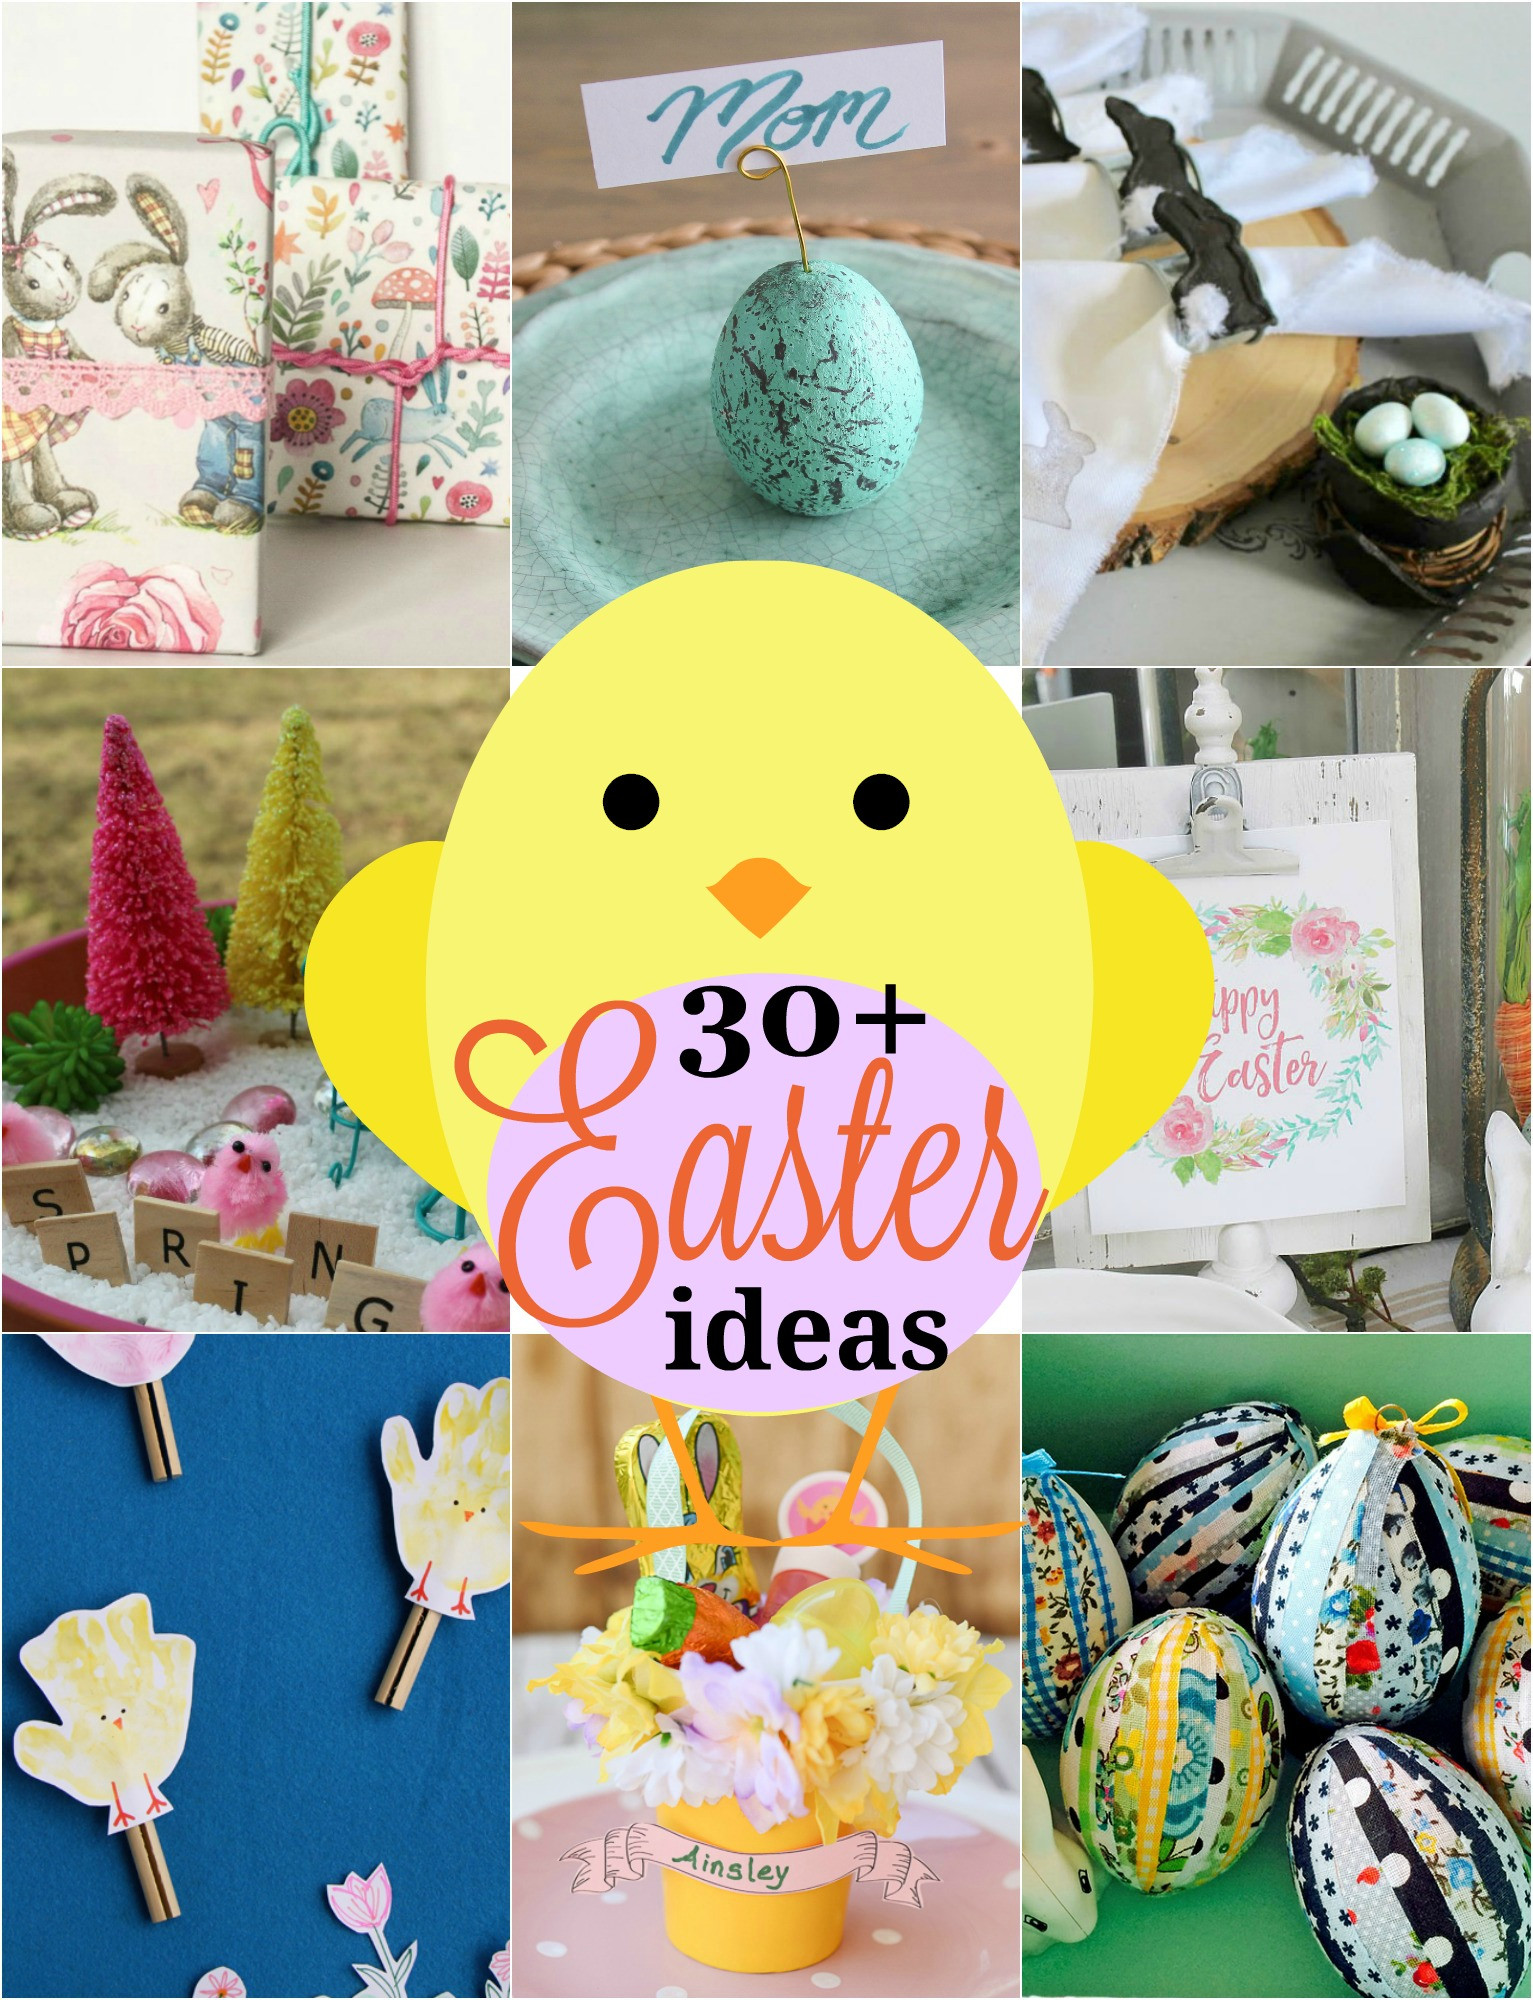 Pinterest Easter Crafts
 30 Easter Craft and Decor Ideas